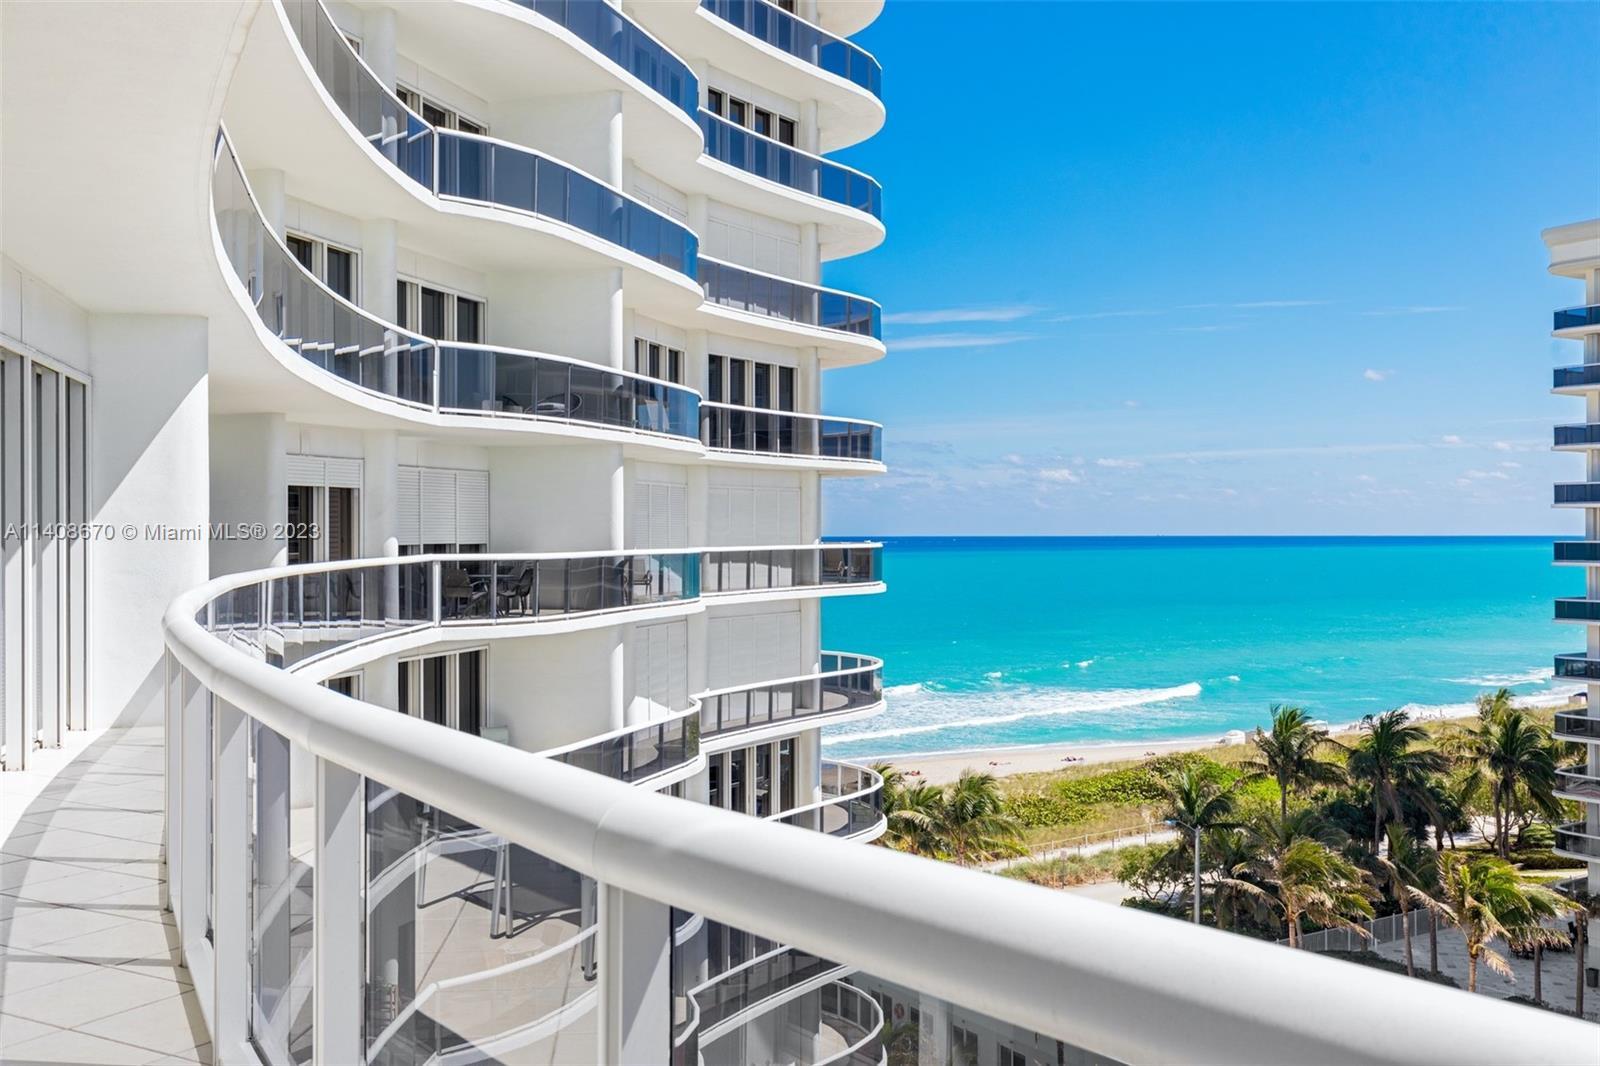 Prestigious Oceanfront Majestic building - Bal Harbour. Take advantage of spectacular panoramic city